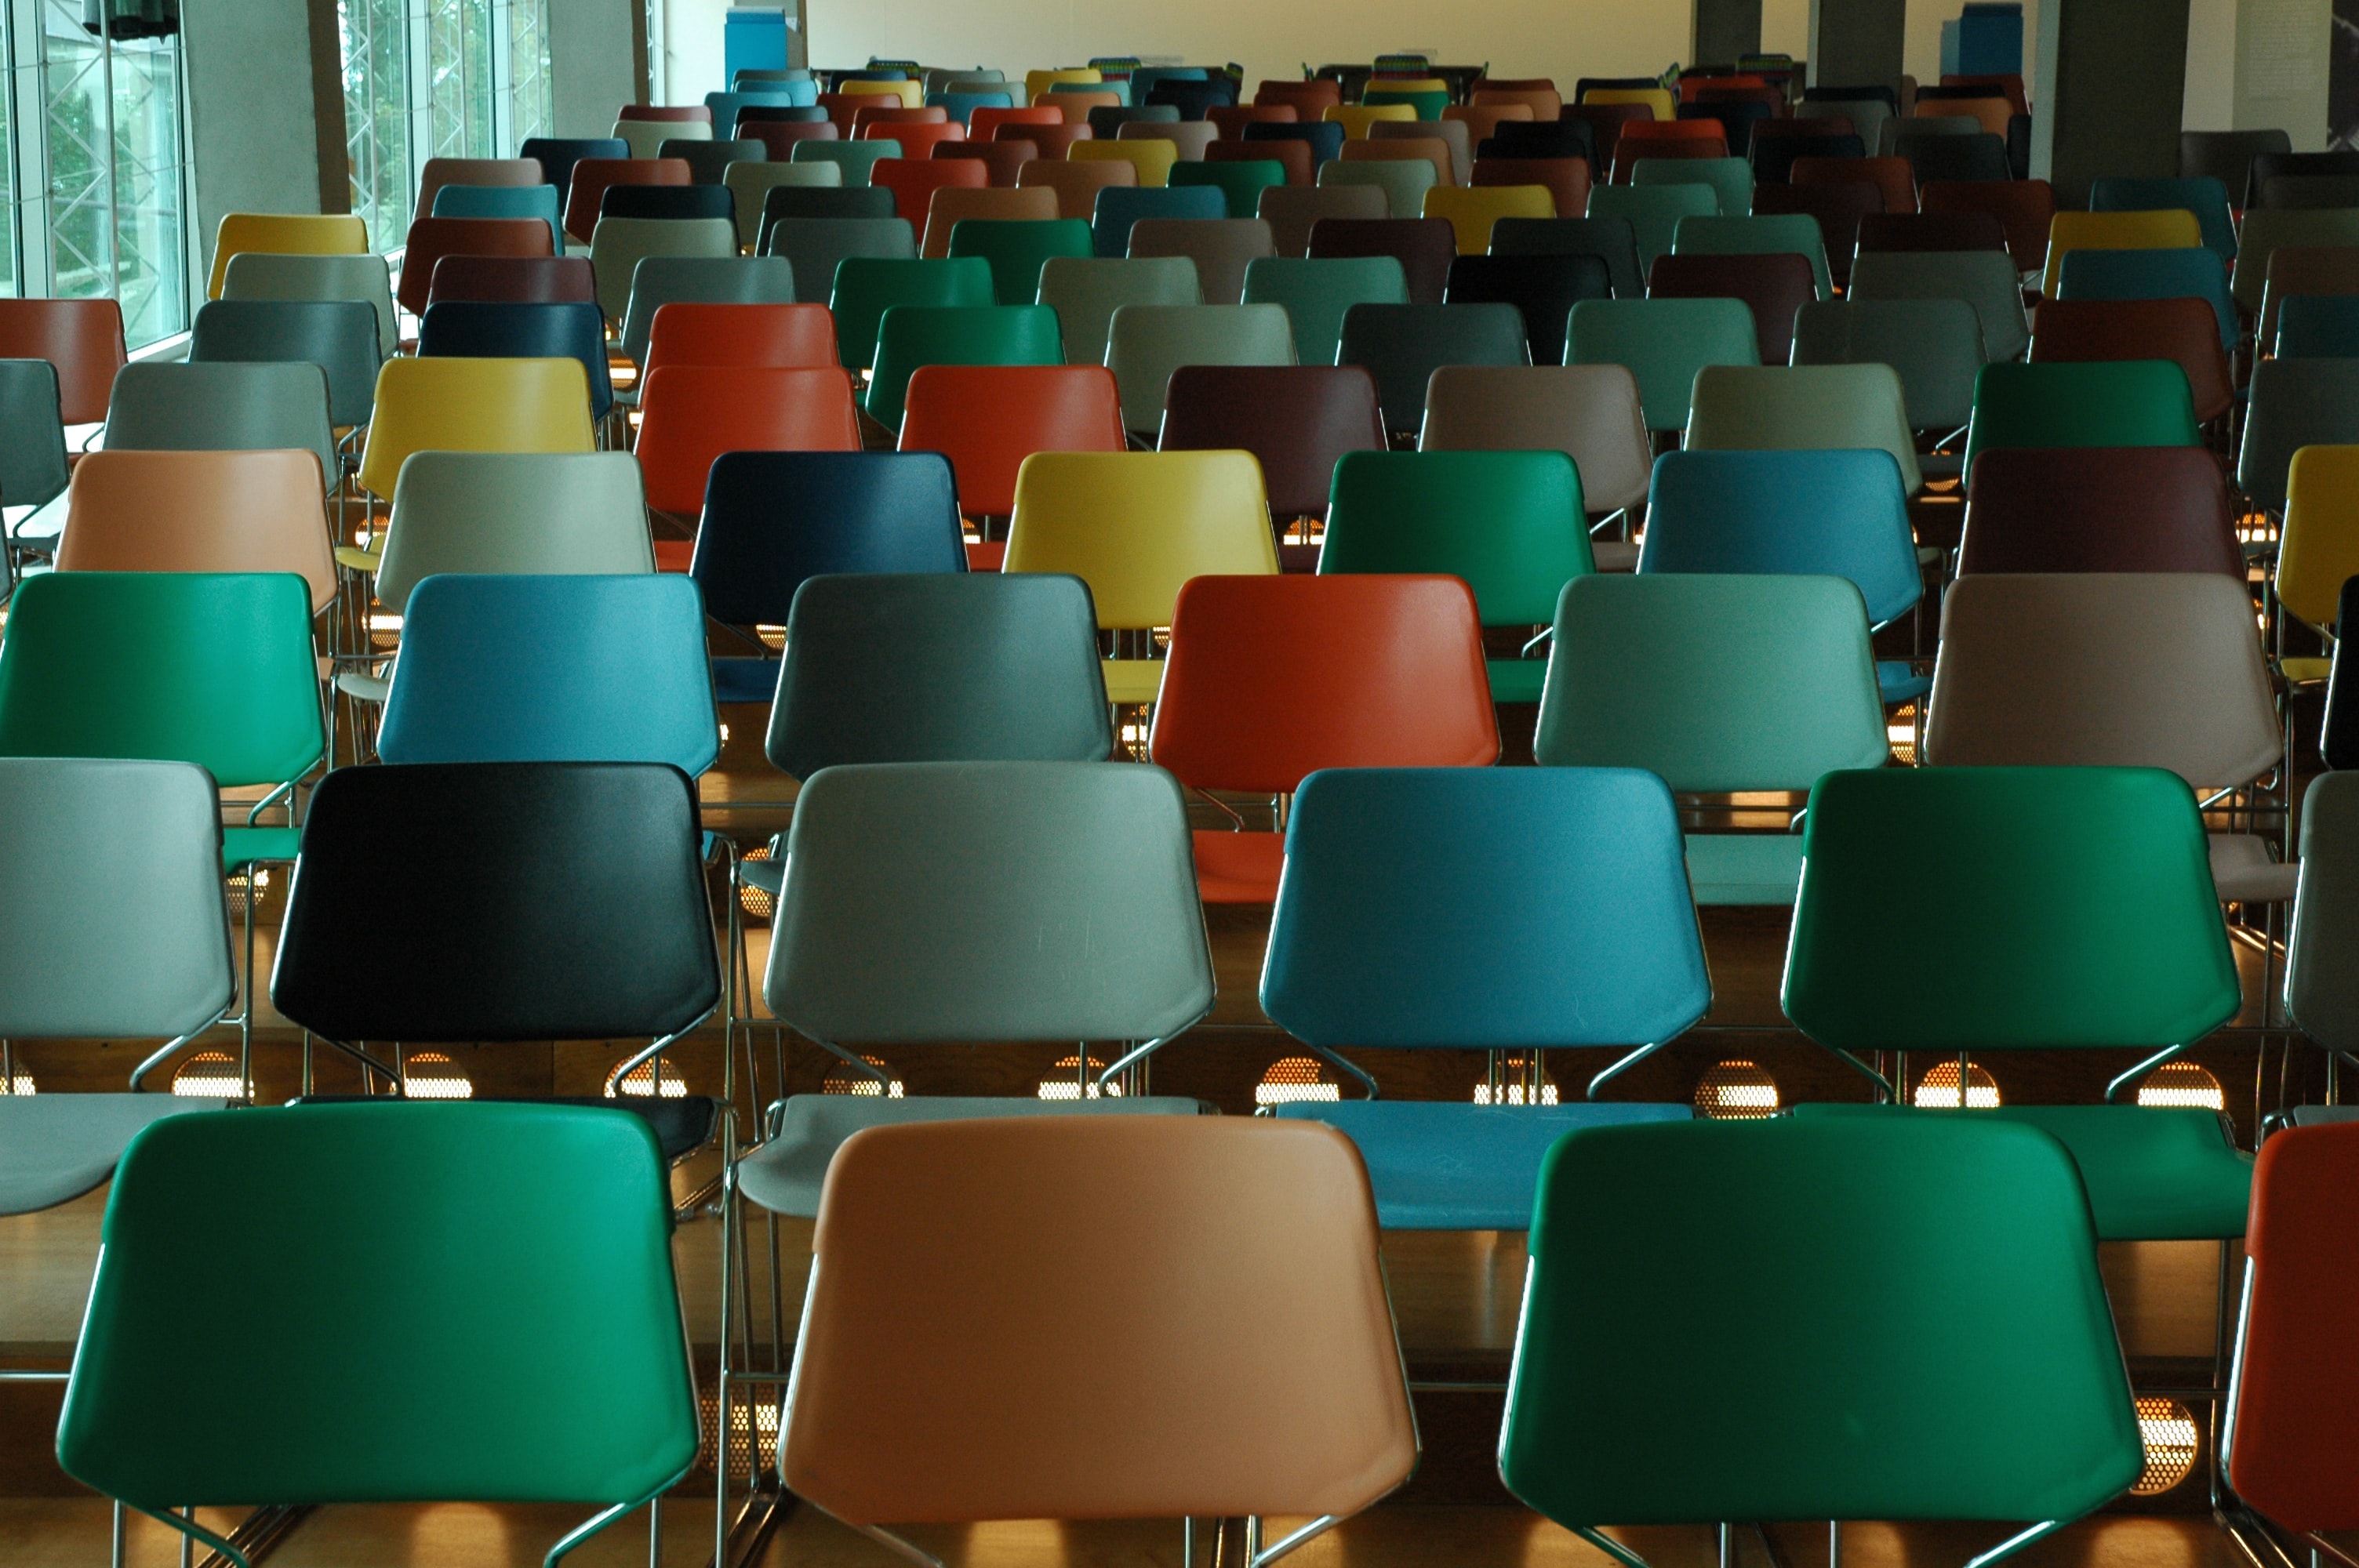 A set of chairs in a college classroom.